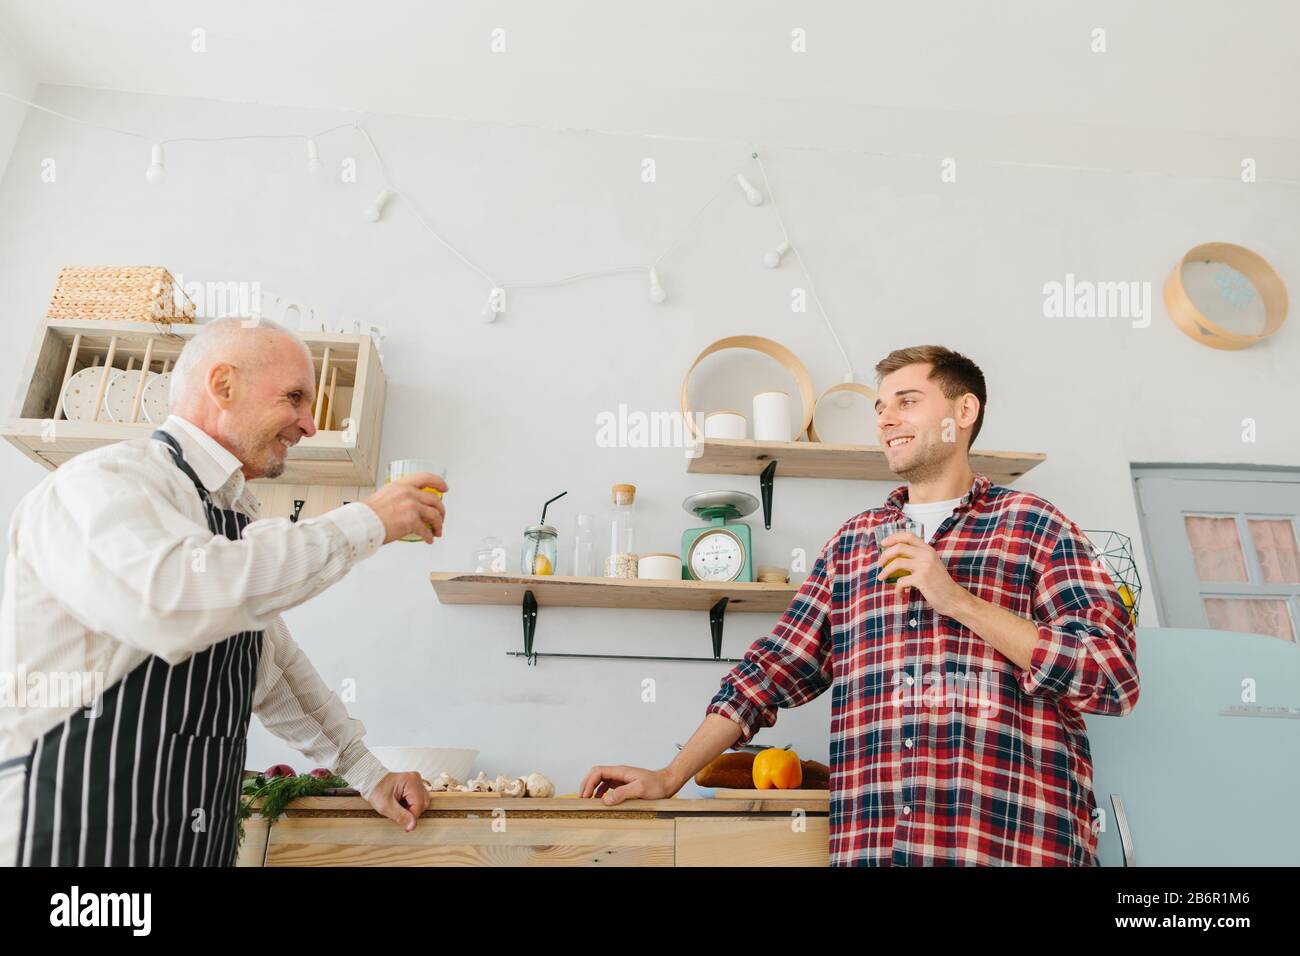 Young man and his father cooking in kitchen Stock Photo